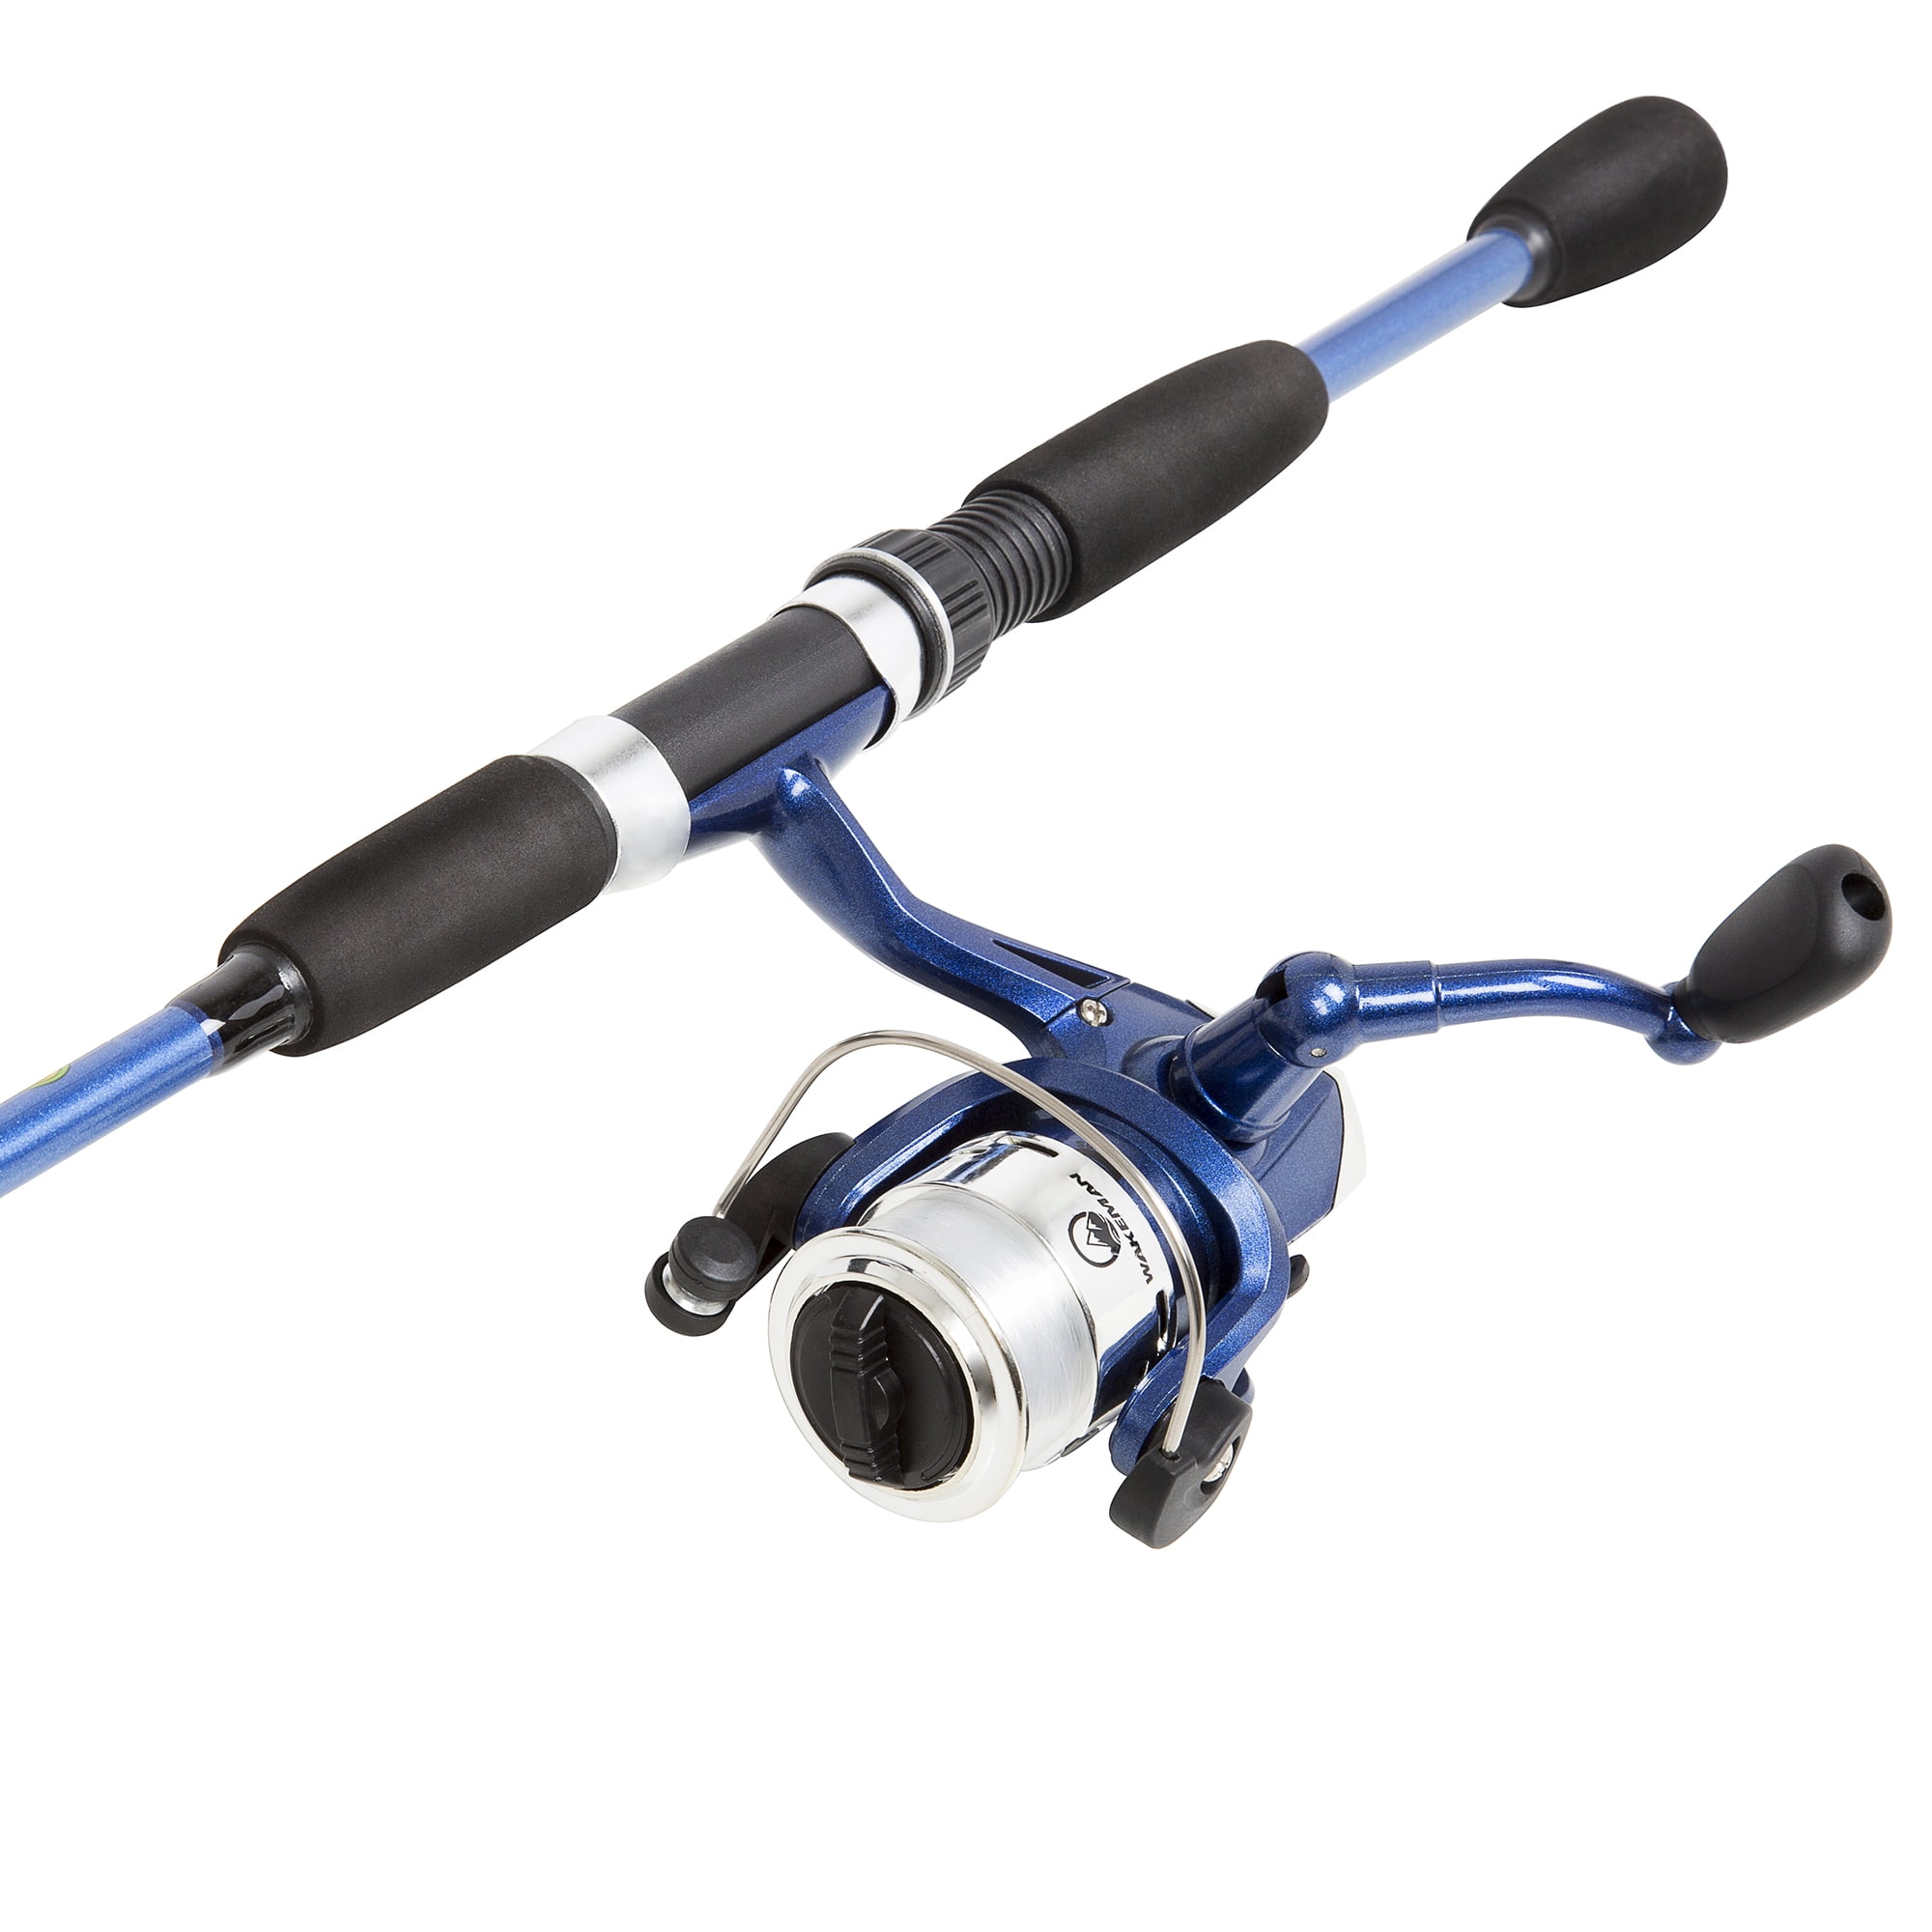  Fishing Rod and Reel Combo - Carbon Pole with Pre-Spooled Spinning  Reel and Golf Grip Handle for Bass, Trout, Salmon, or Catfish by Wakeman  (Blue) : Everything Else